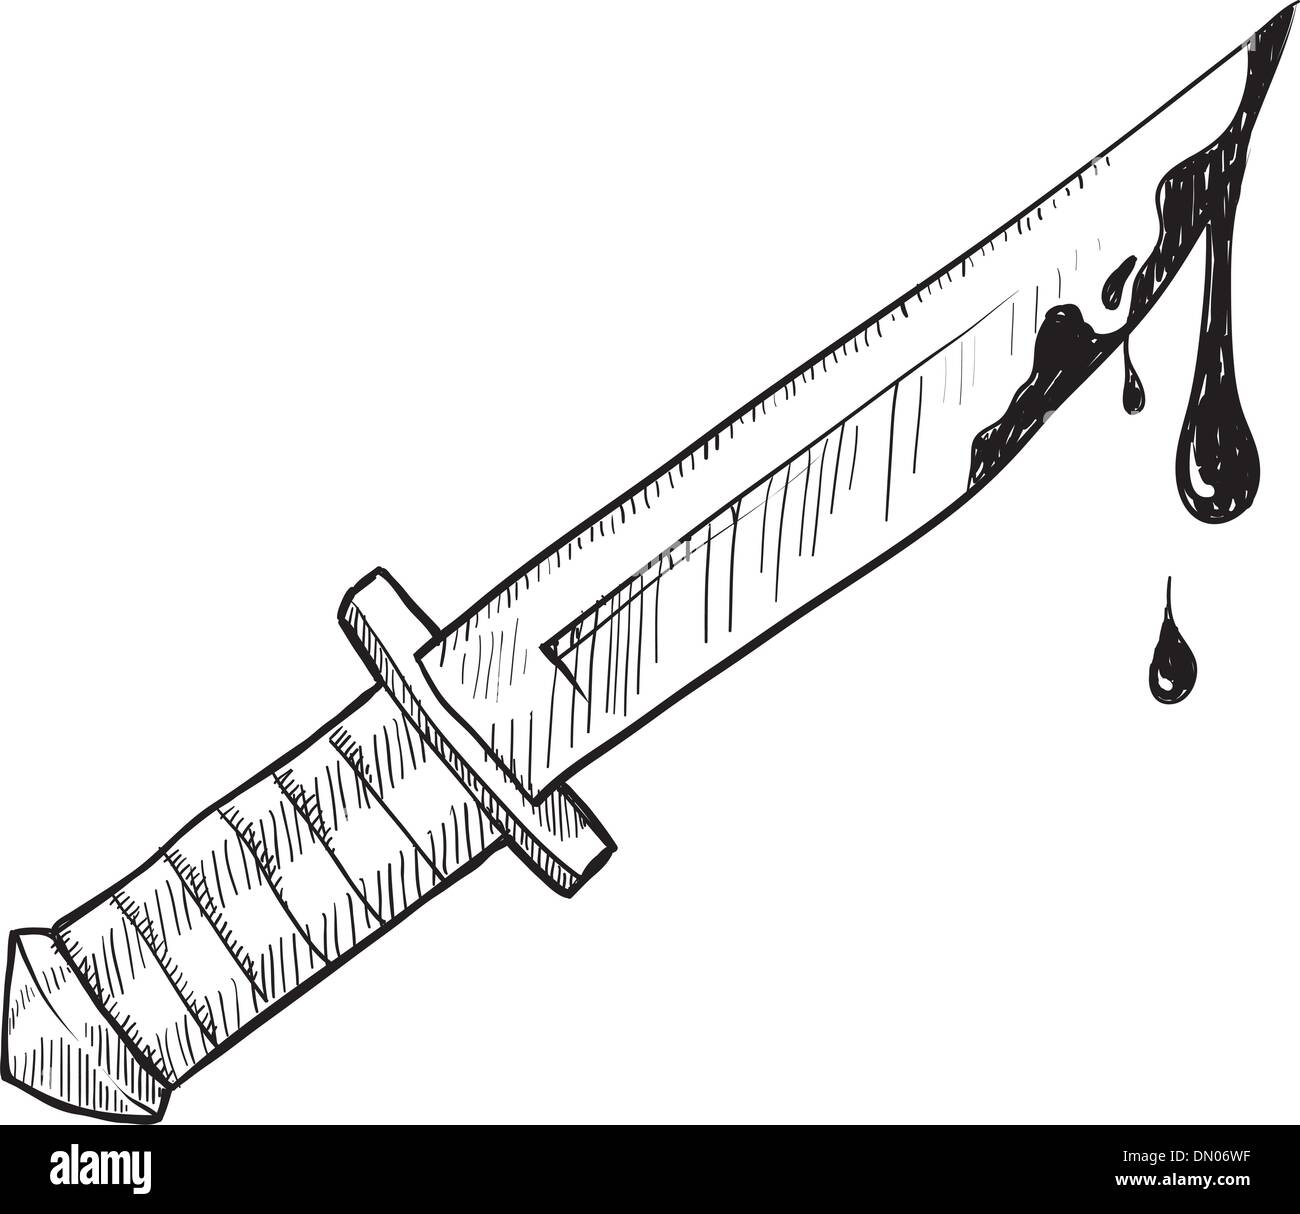 Albums 95+ Images how to draw a bloody knife Updated